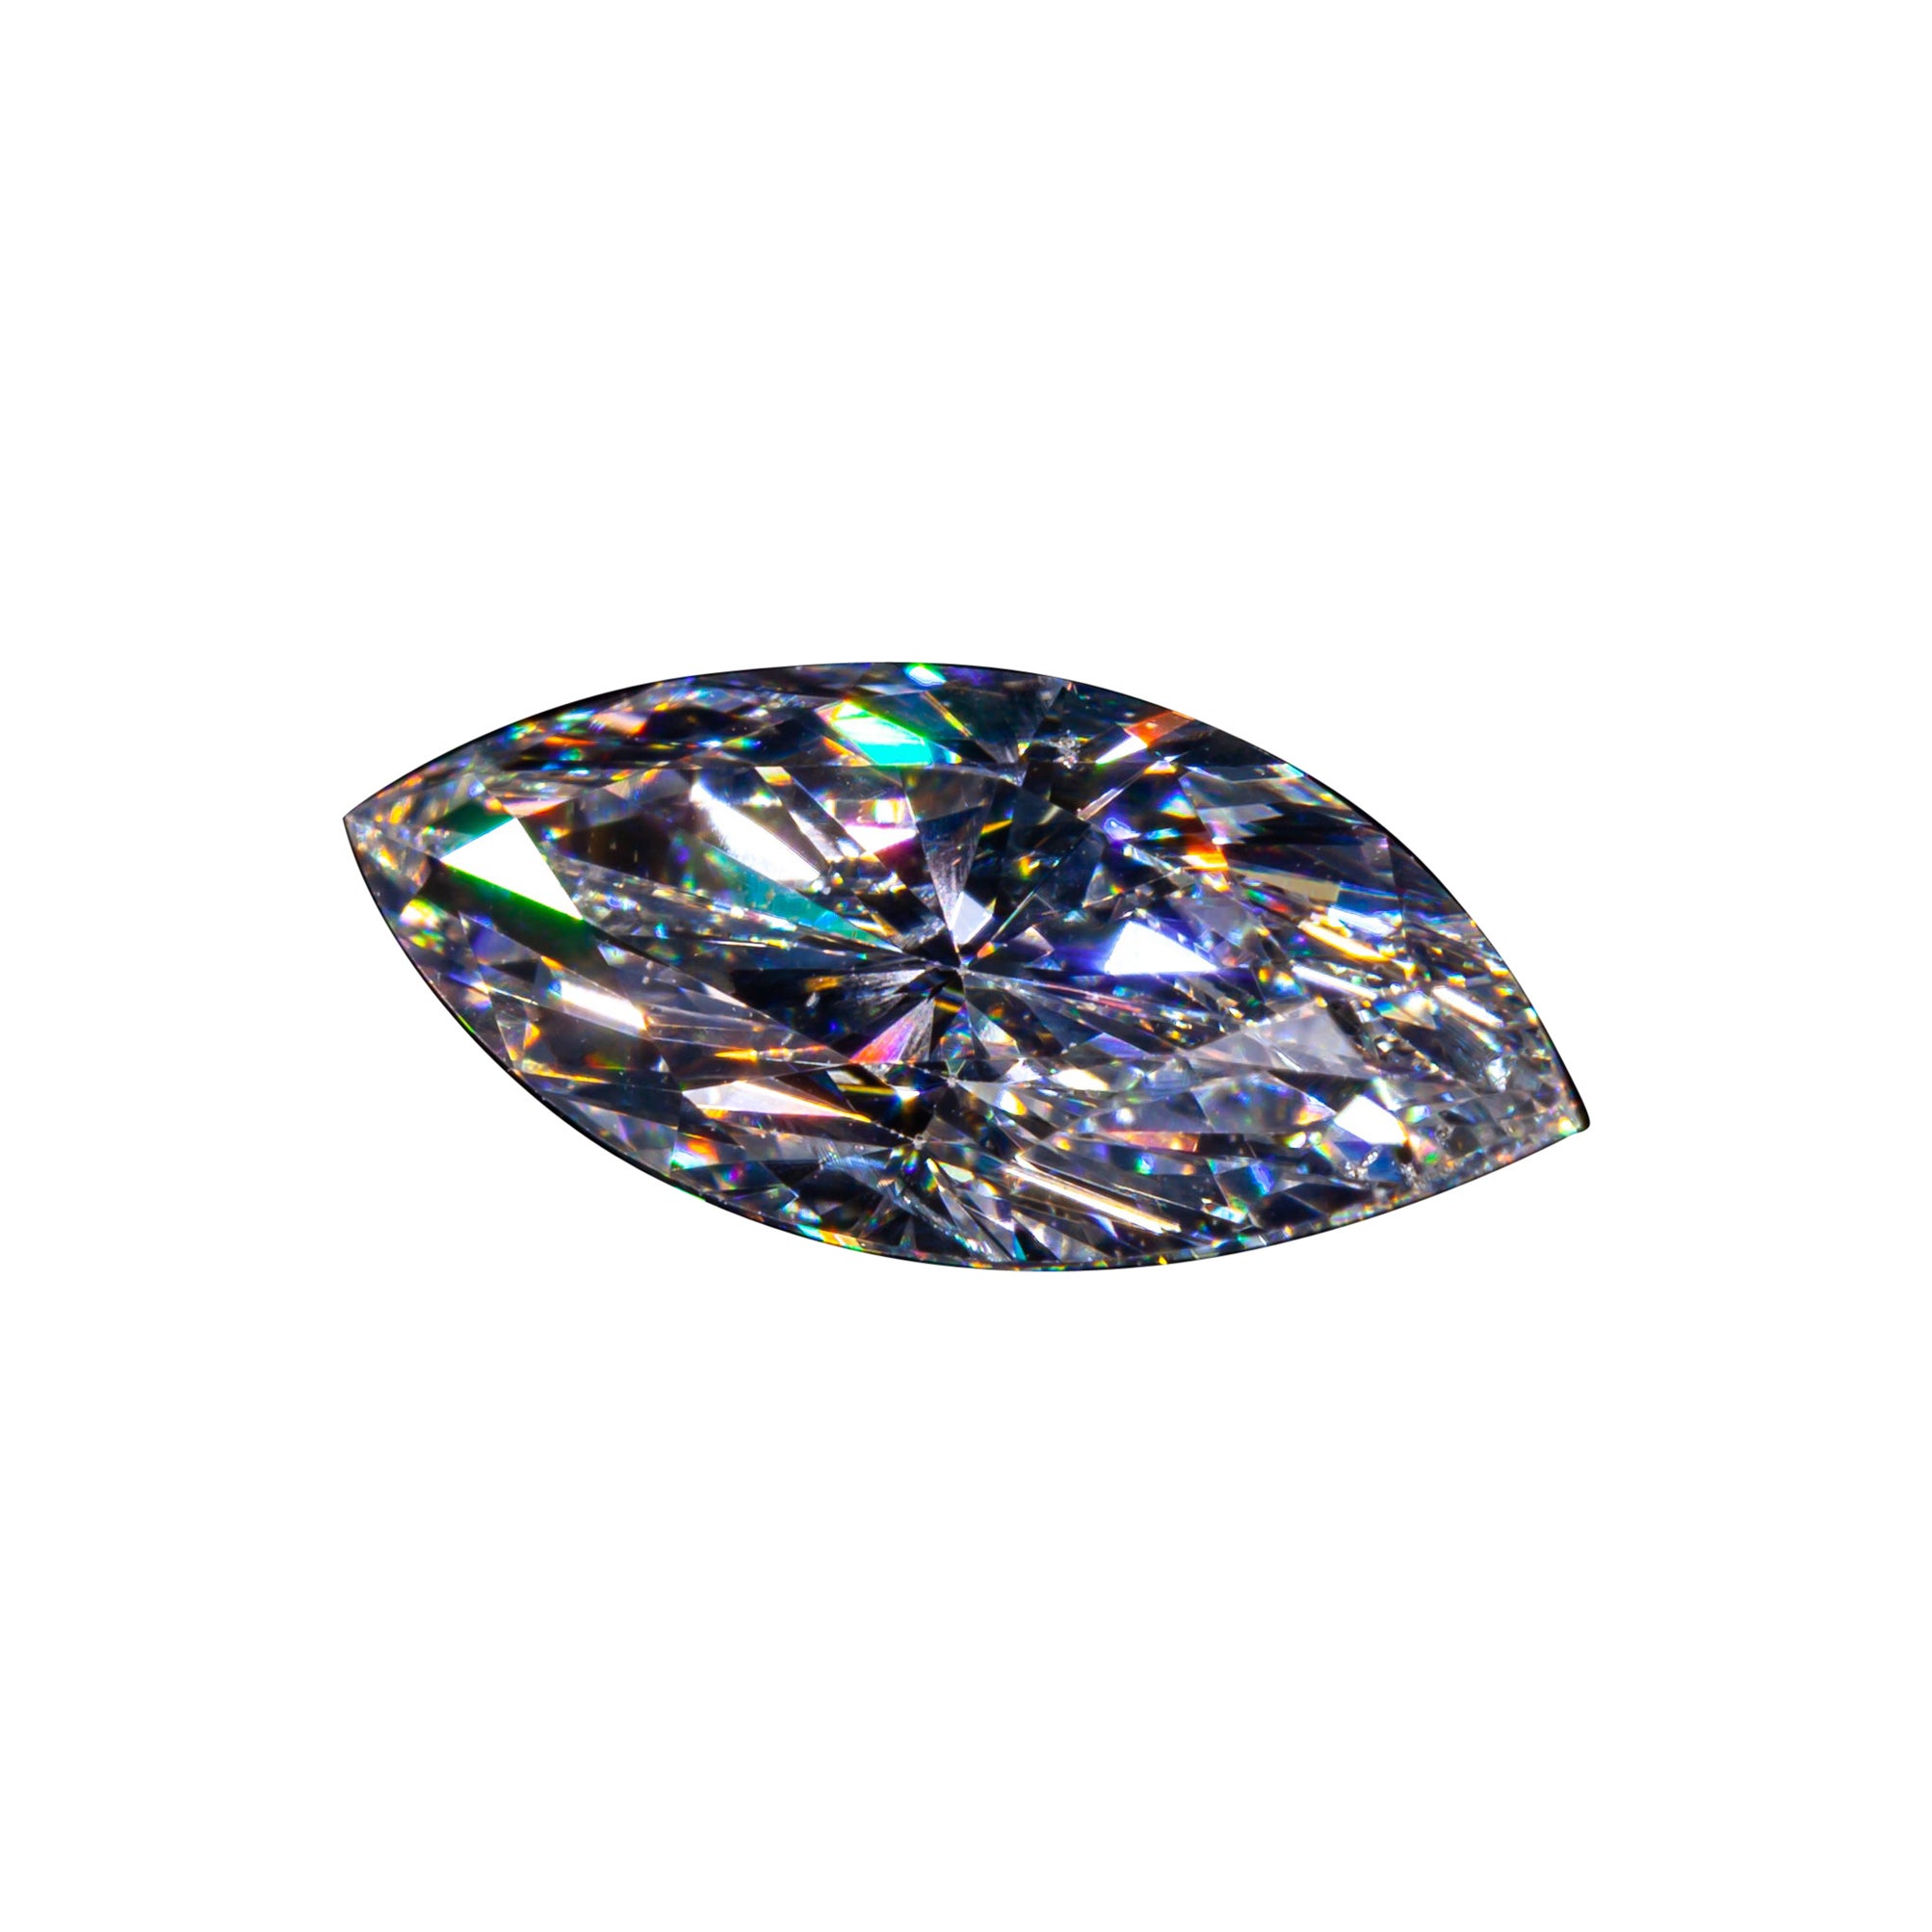 1.10 Carat Loose D / I1 Marquise Brilliant Cut Diamond GIA Certified For Sale